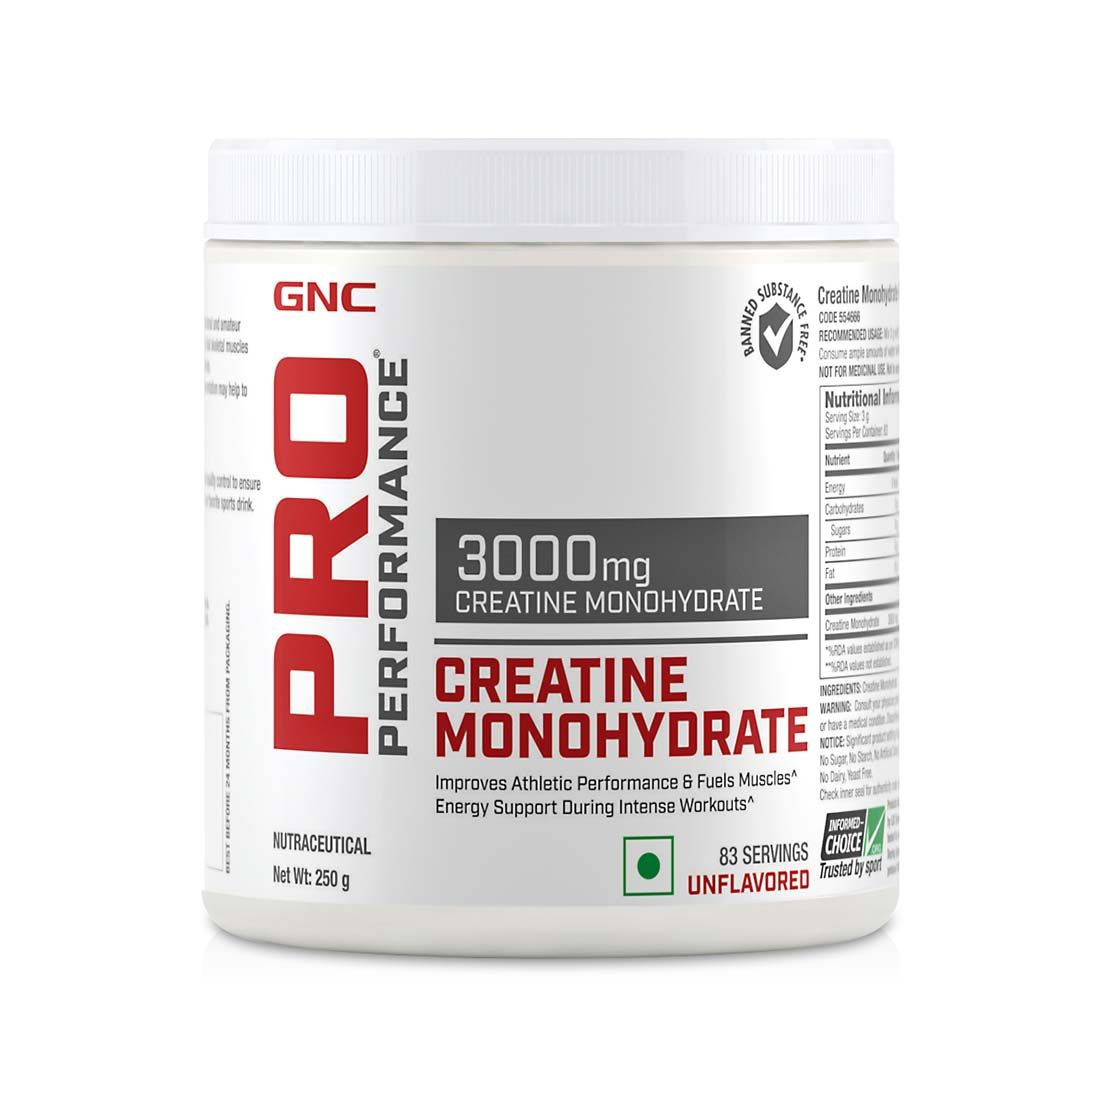 GNC Pro Performance Unflavored Creatine Monohydrate